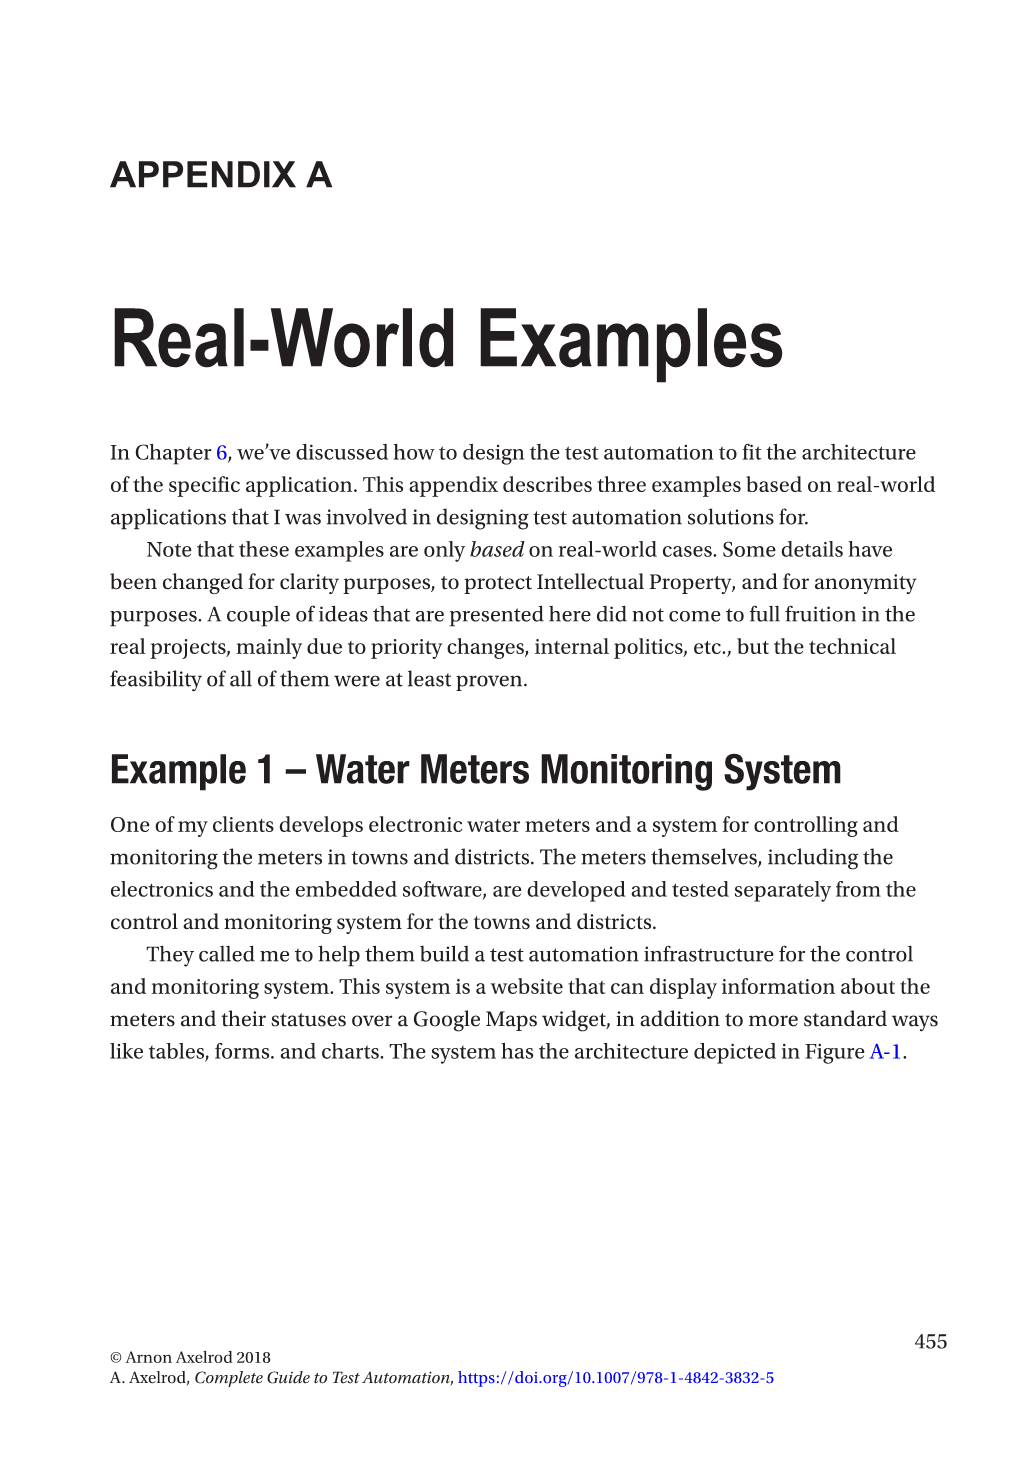 Real-World Examples